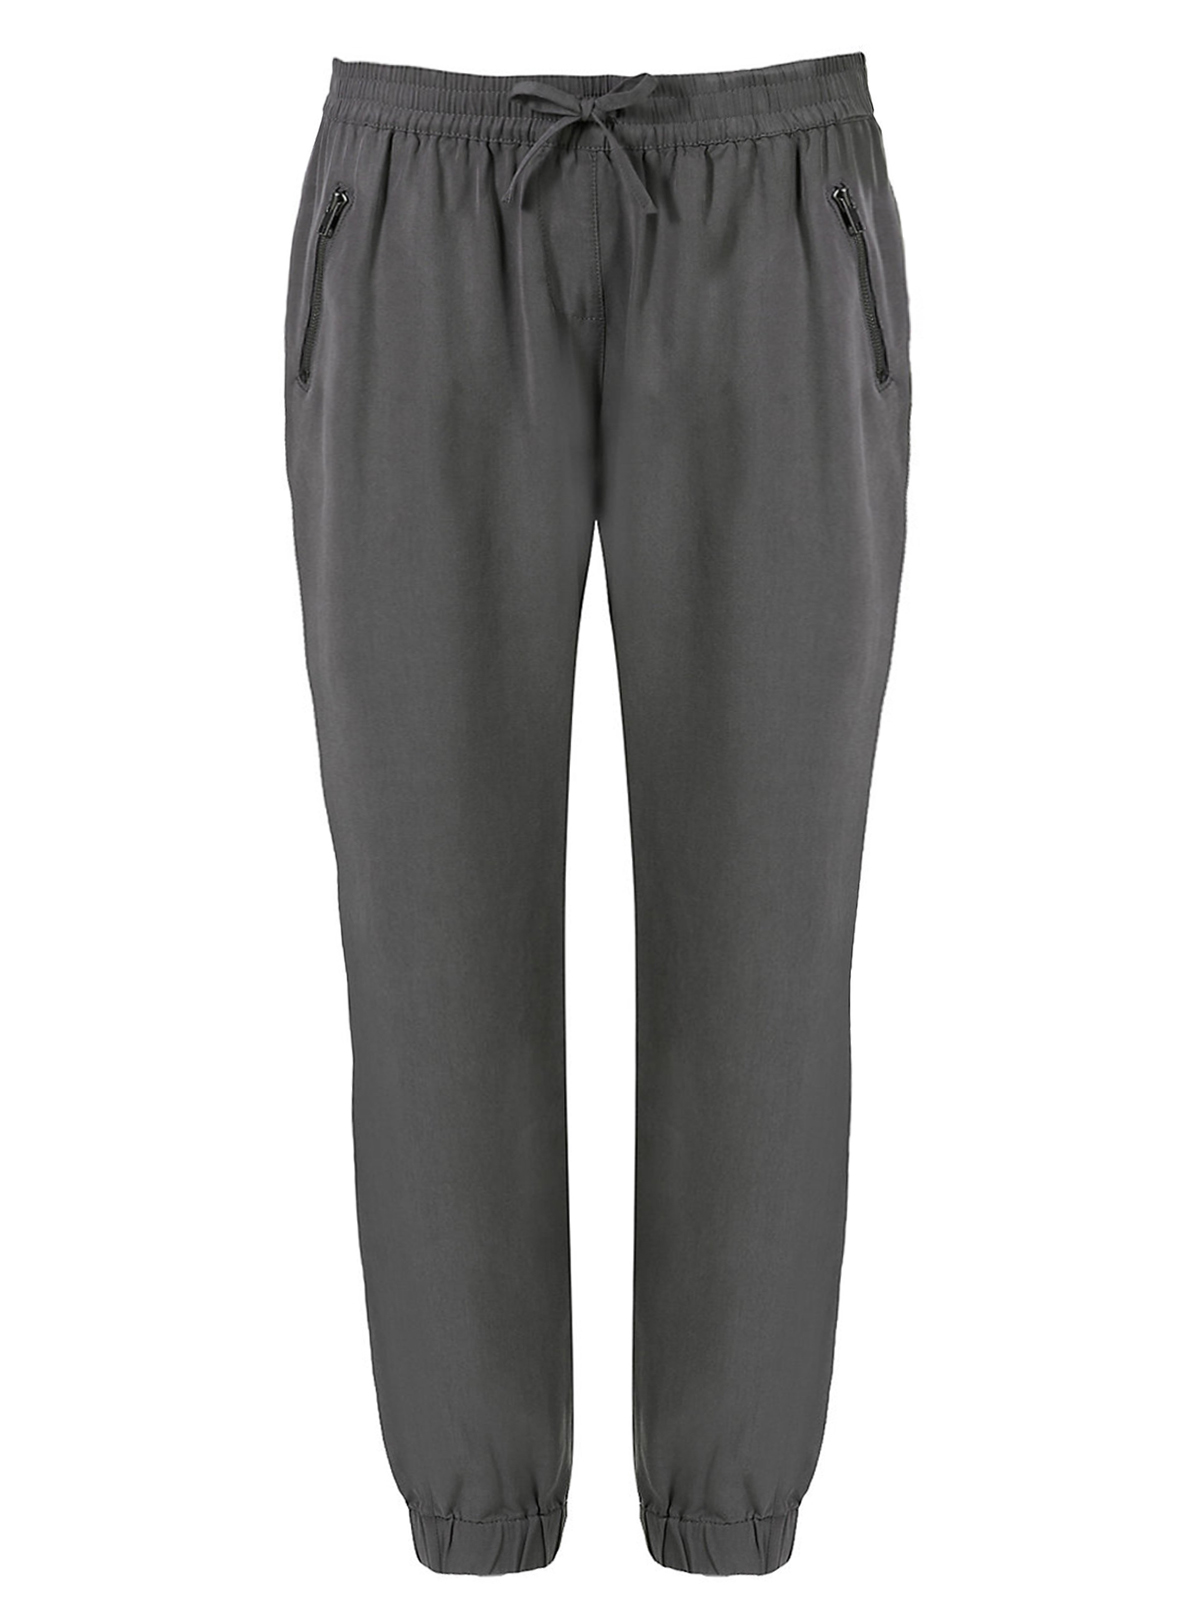 Marks and Spencer - - M&5 ASH-GREY Pull On Cuffed Joggers - Size 12 to 16